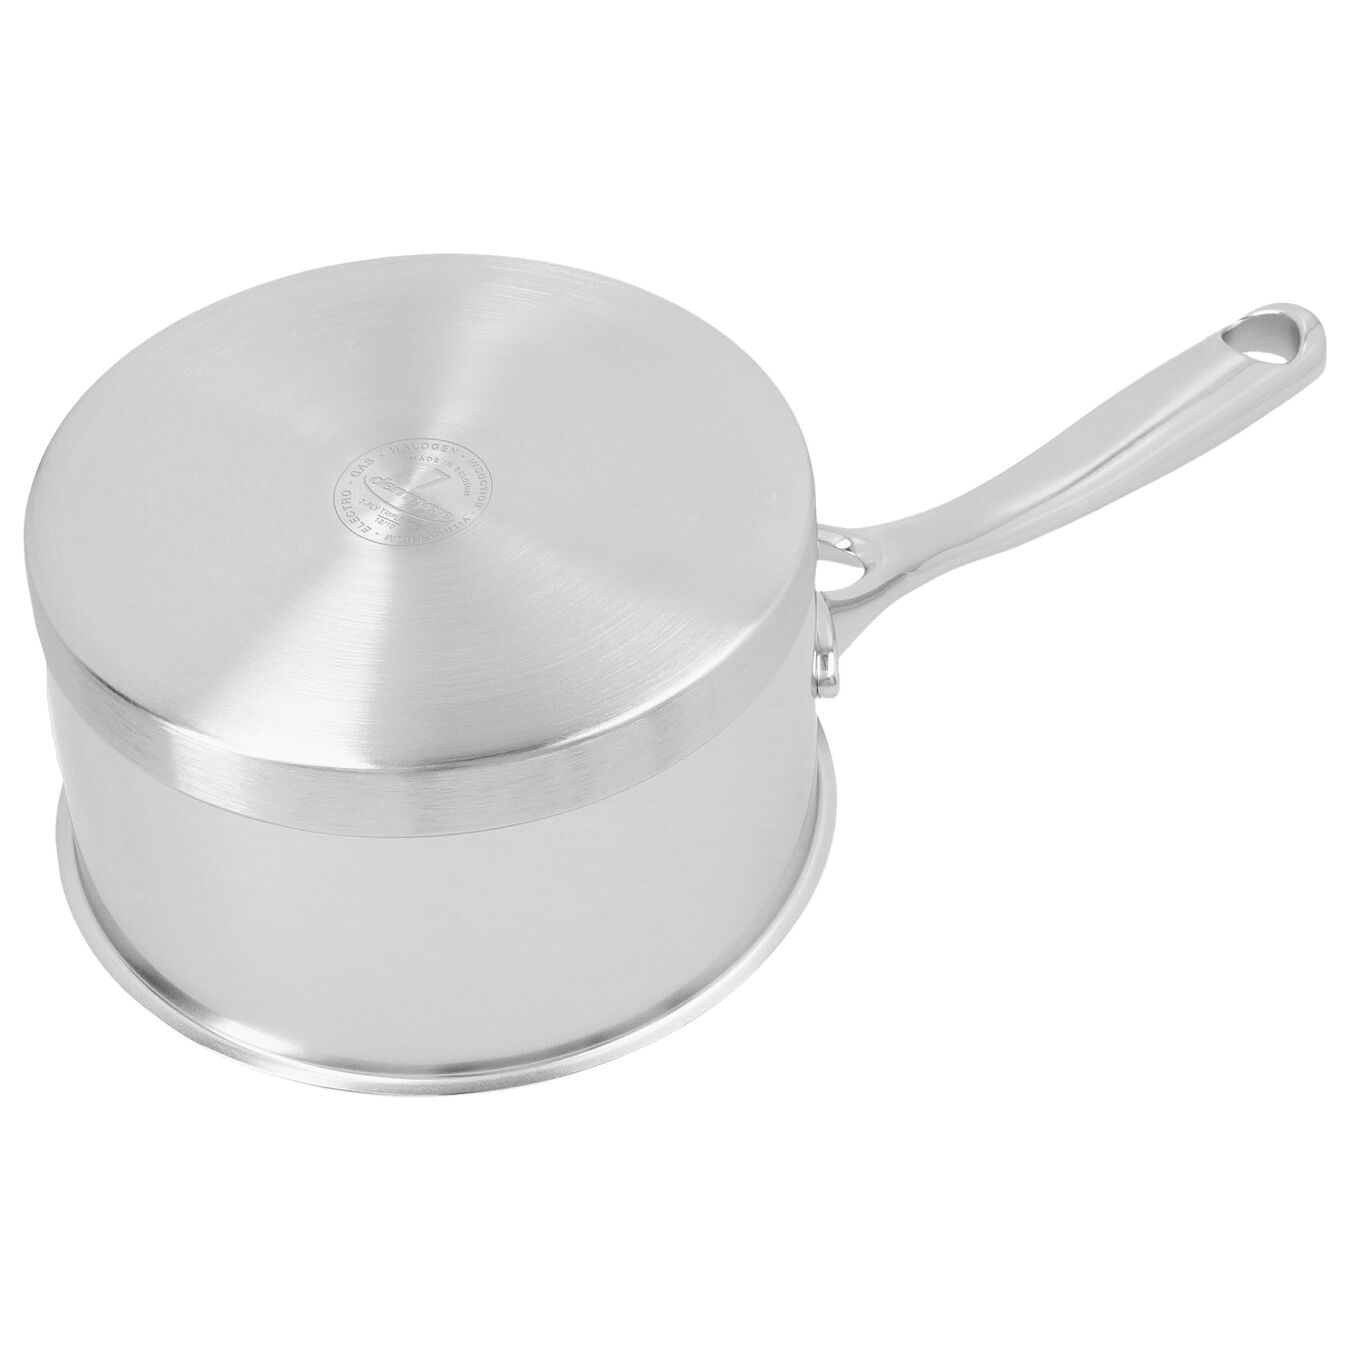 14 cm 18/10 Stainless Steel Saucepan with lid silver,,large 4